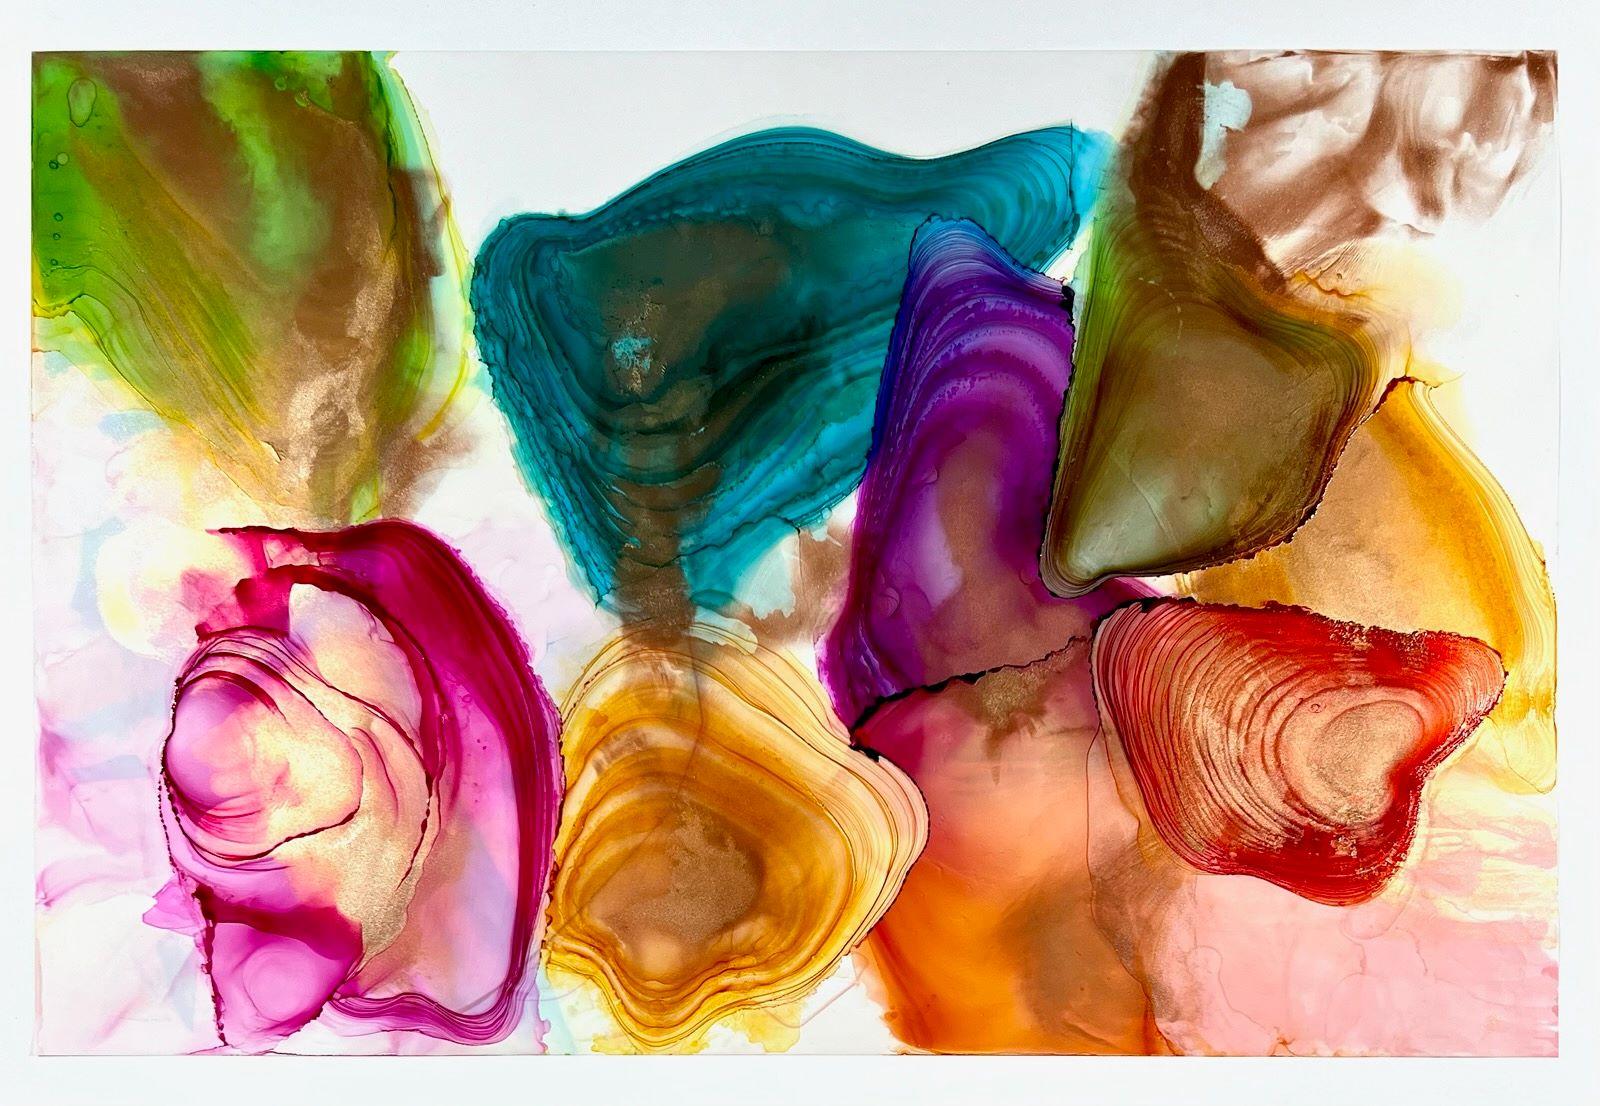 <p>Artist Comments<br>Ringed color formations excite the senses in this dazzling abstraction by artist Eric Wilson. 